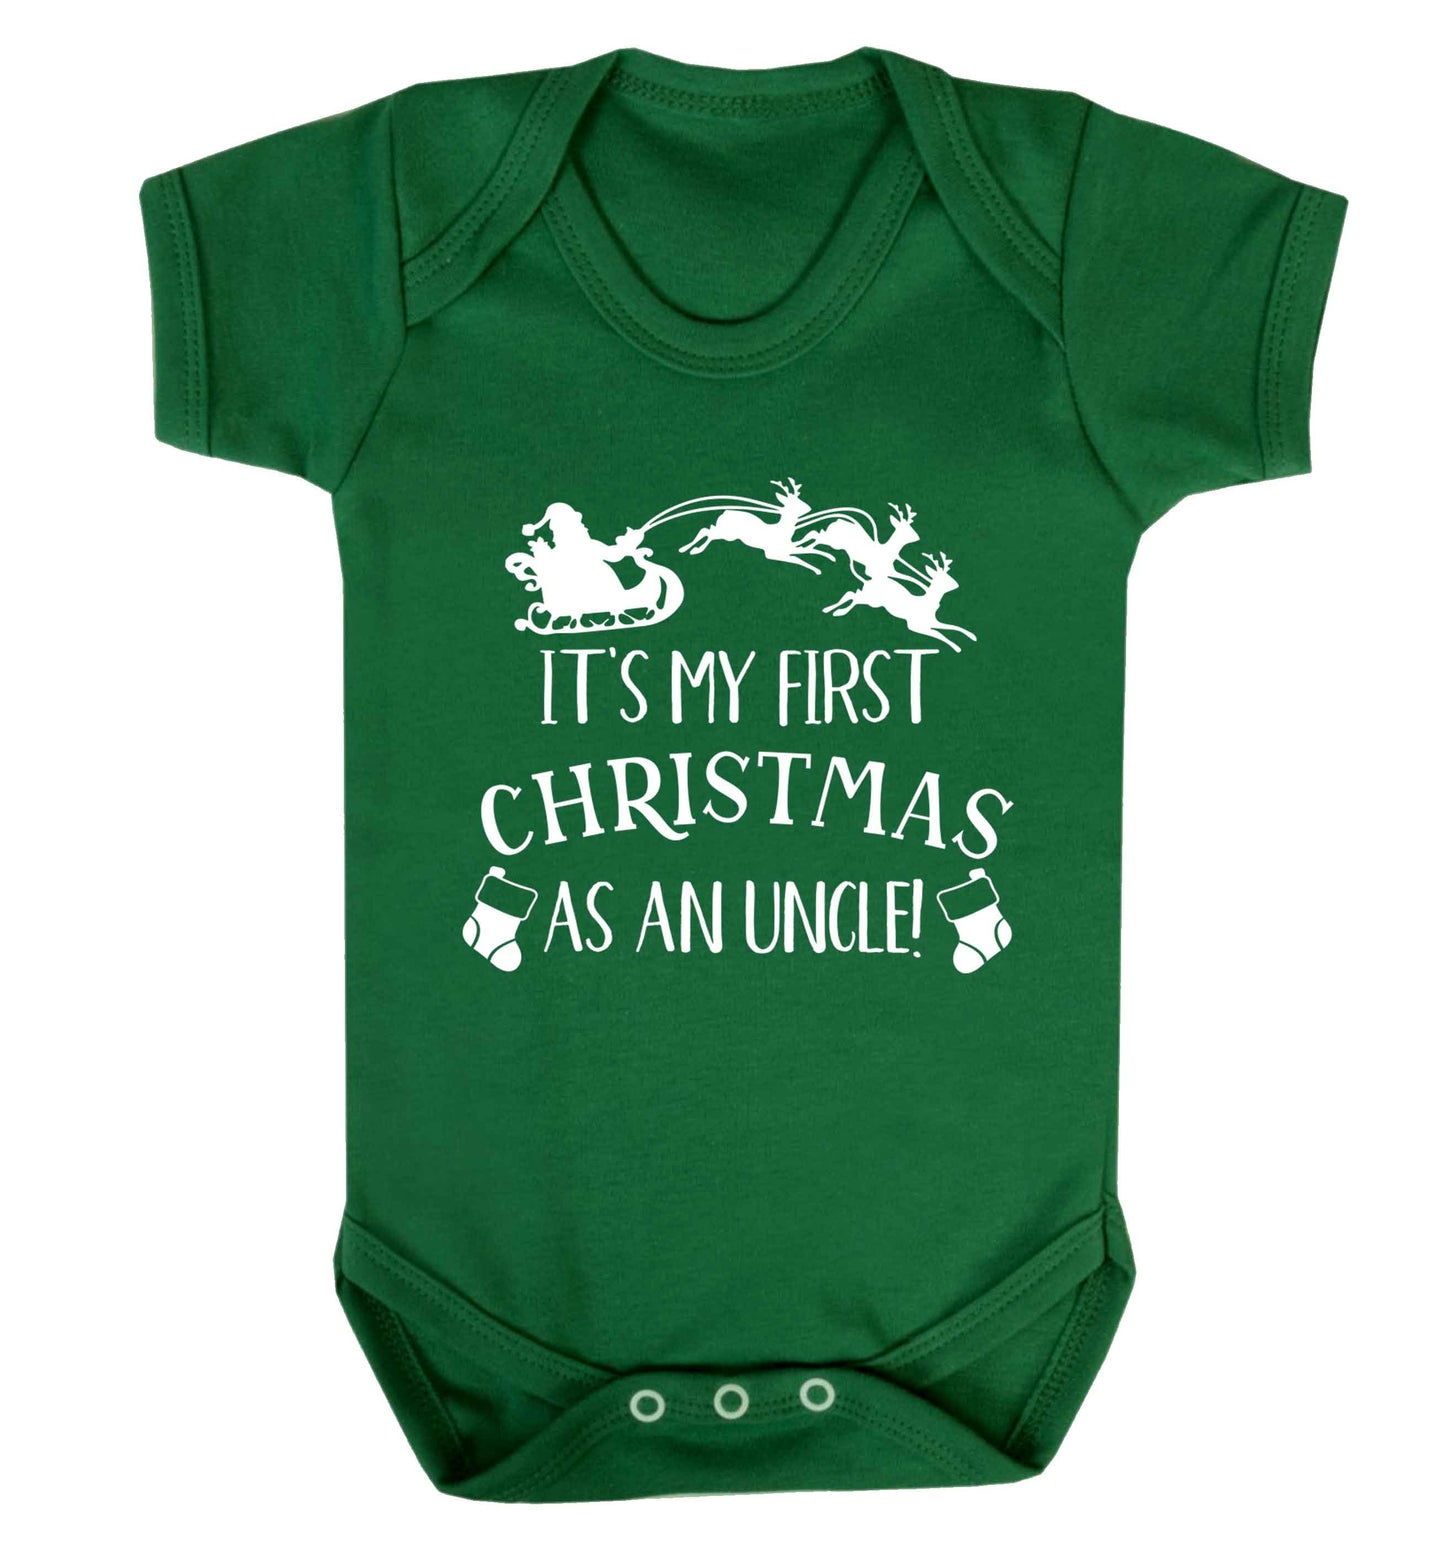 It's my first Christmas as an uncle! Baby Vest green 18-24 months